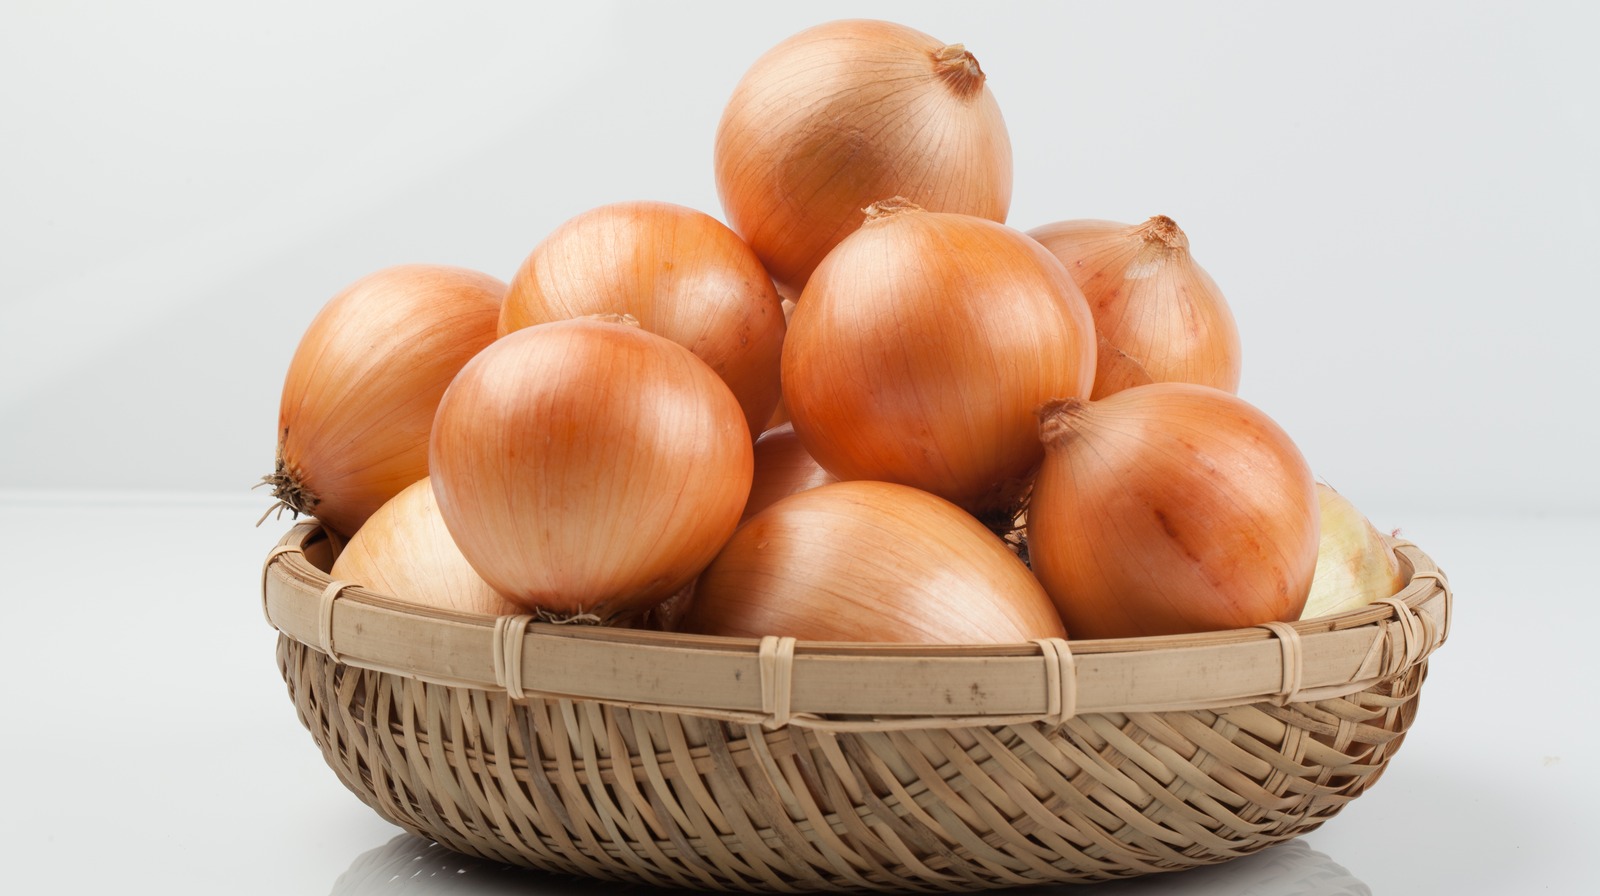 Shallots vs Onions - What is the Difference? and How to Use Them